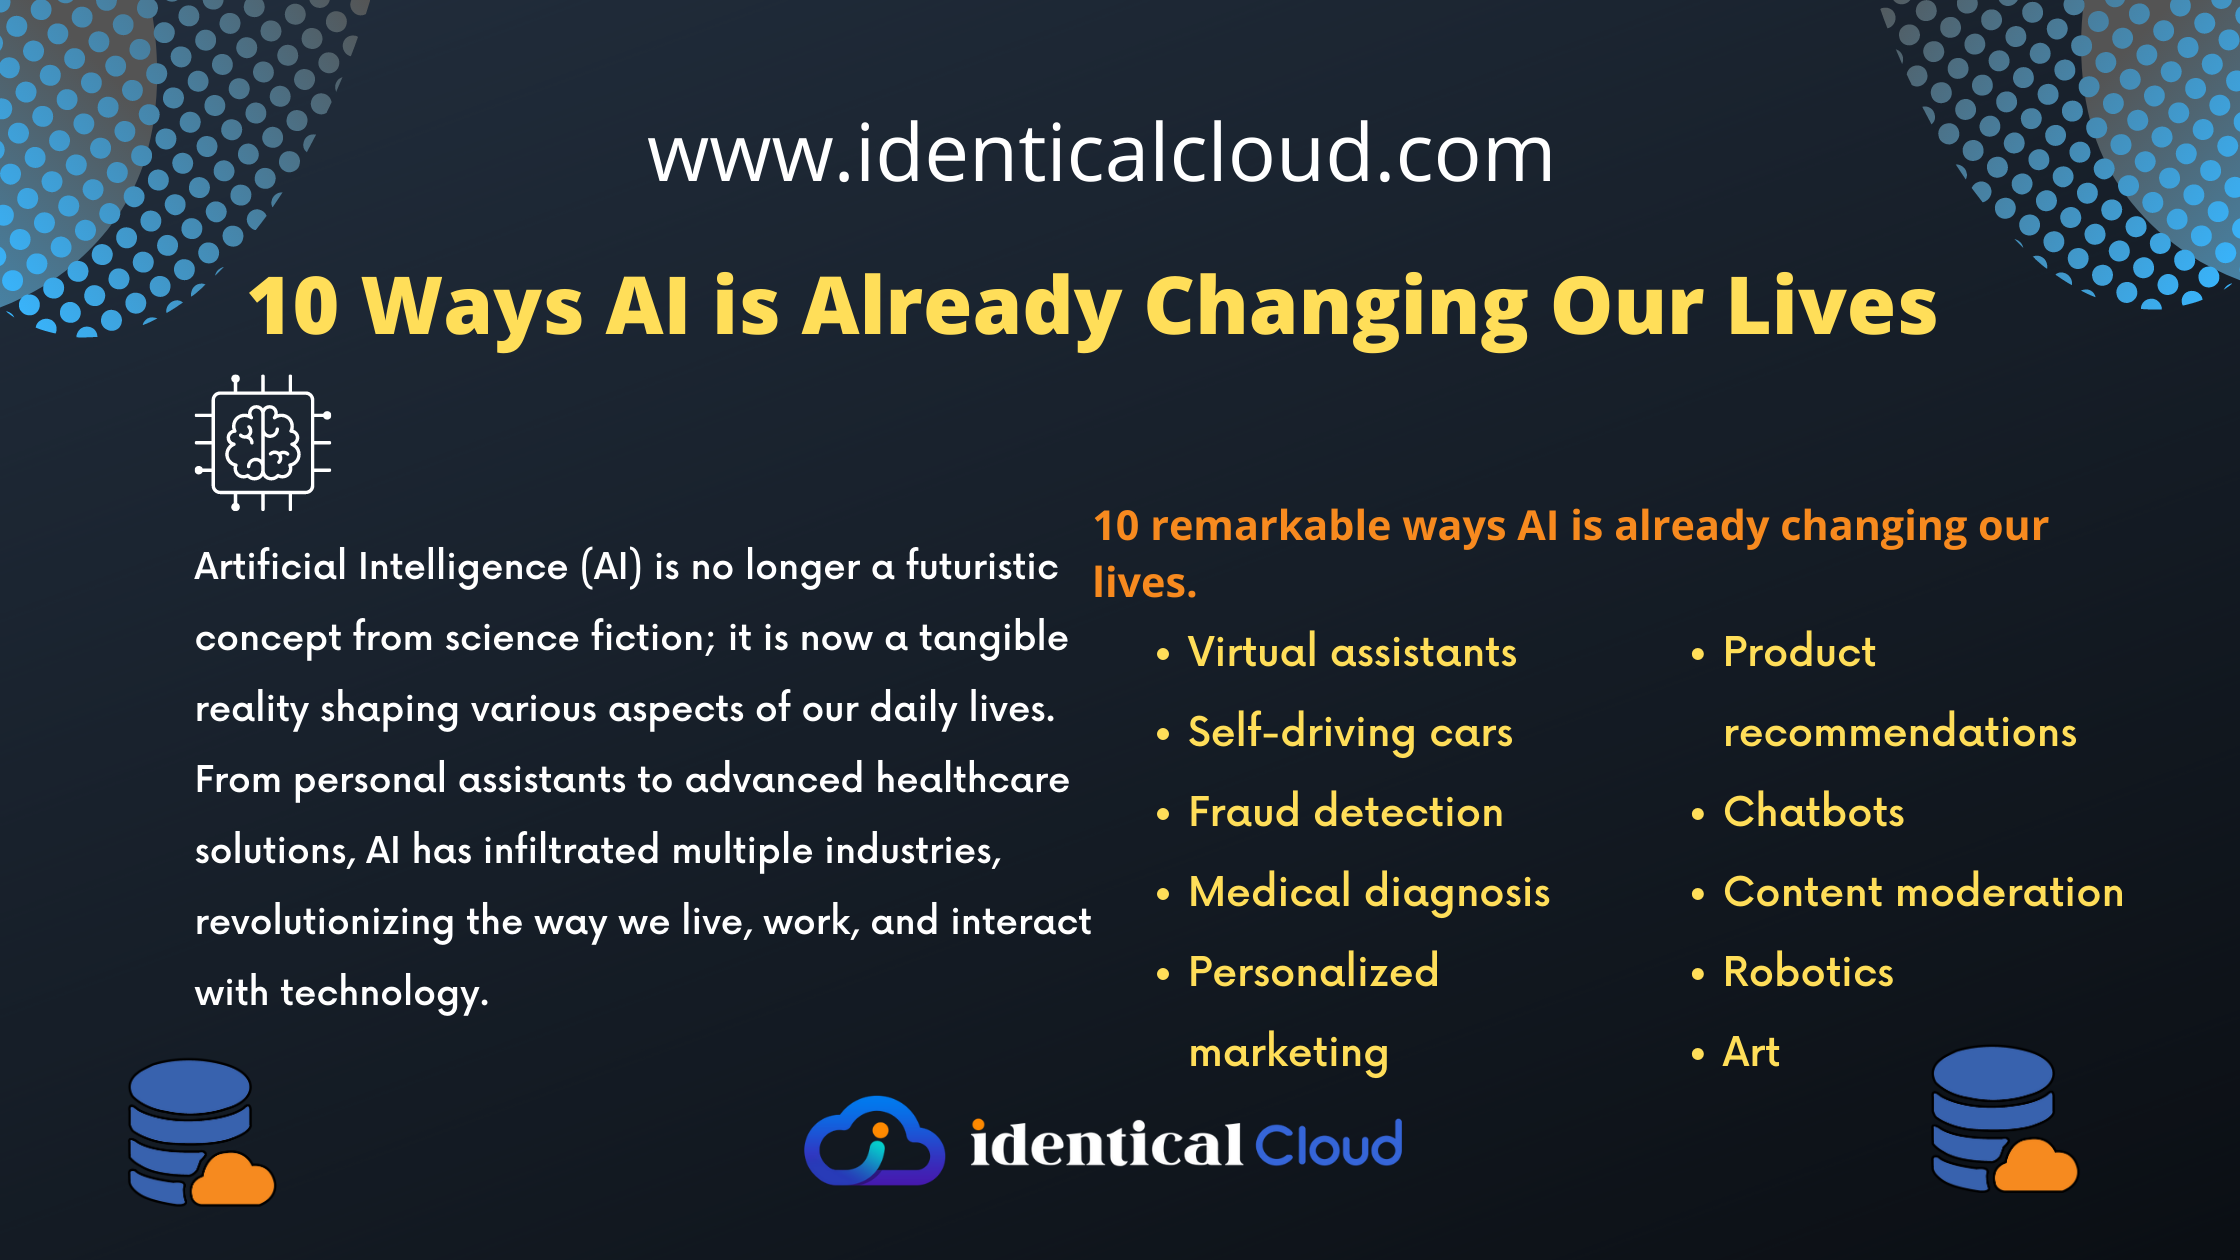 10 Ways AI is Already Changing Our Lives - identicalcloud.com